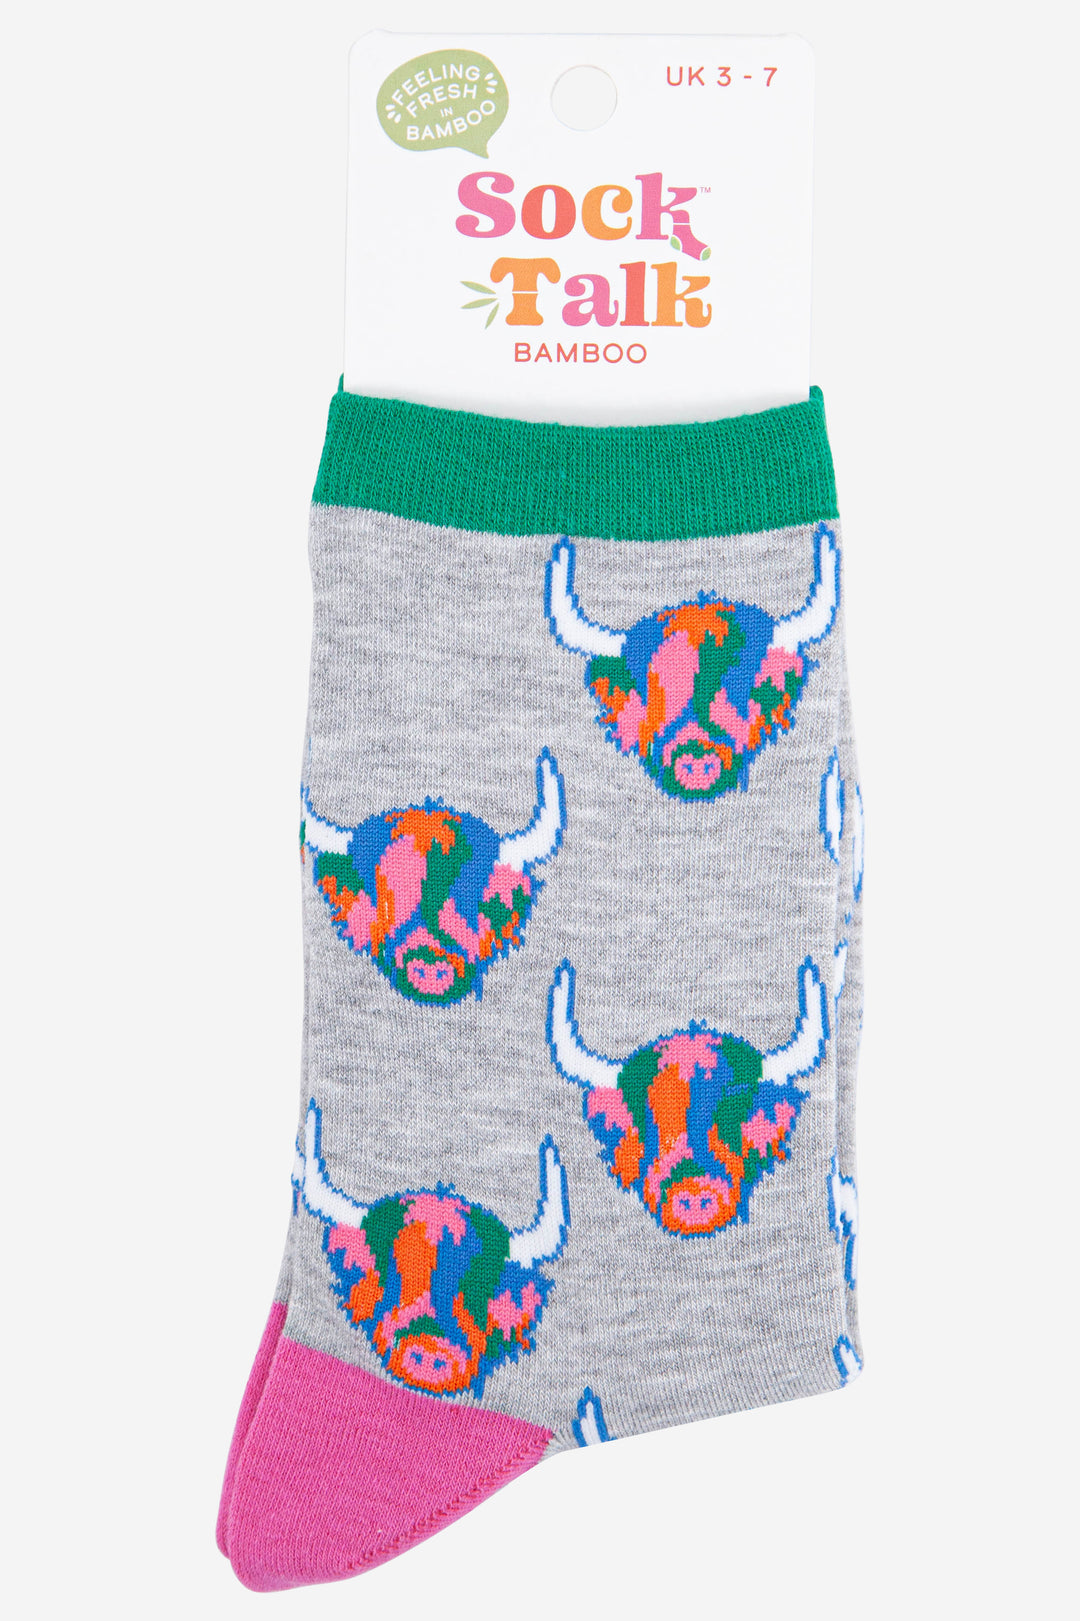 ladies grey bamboo socks with an all over pattern of colourful highland cow faces, uk size 3-7